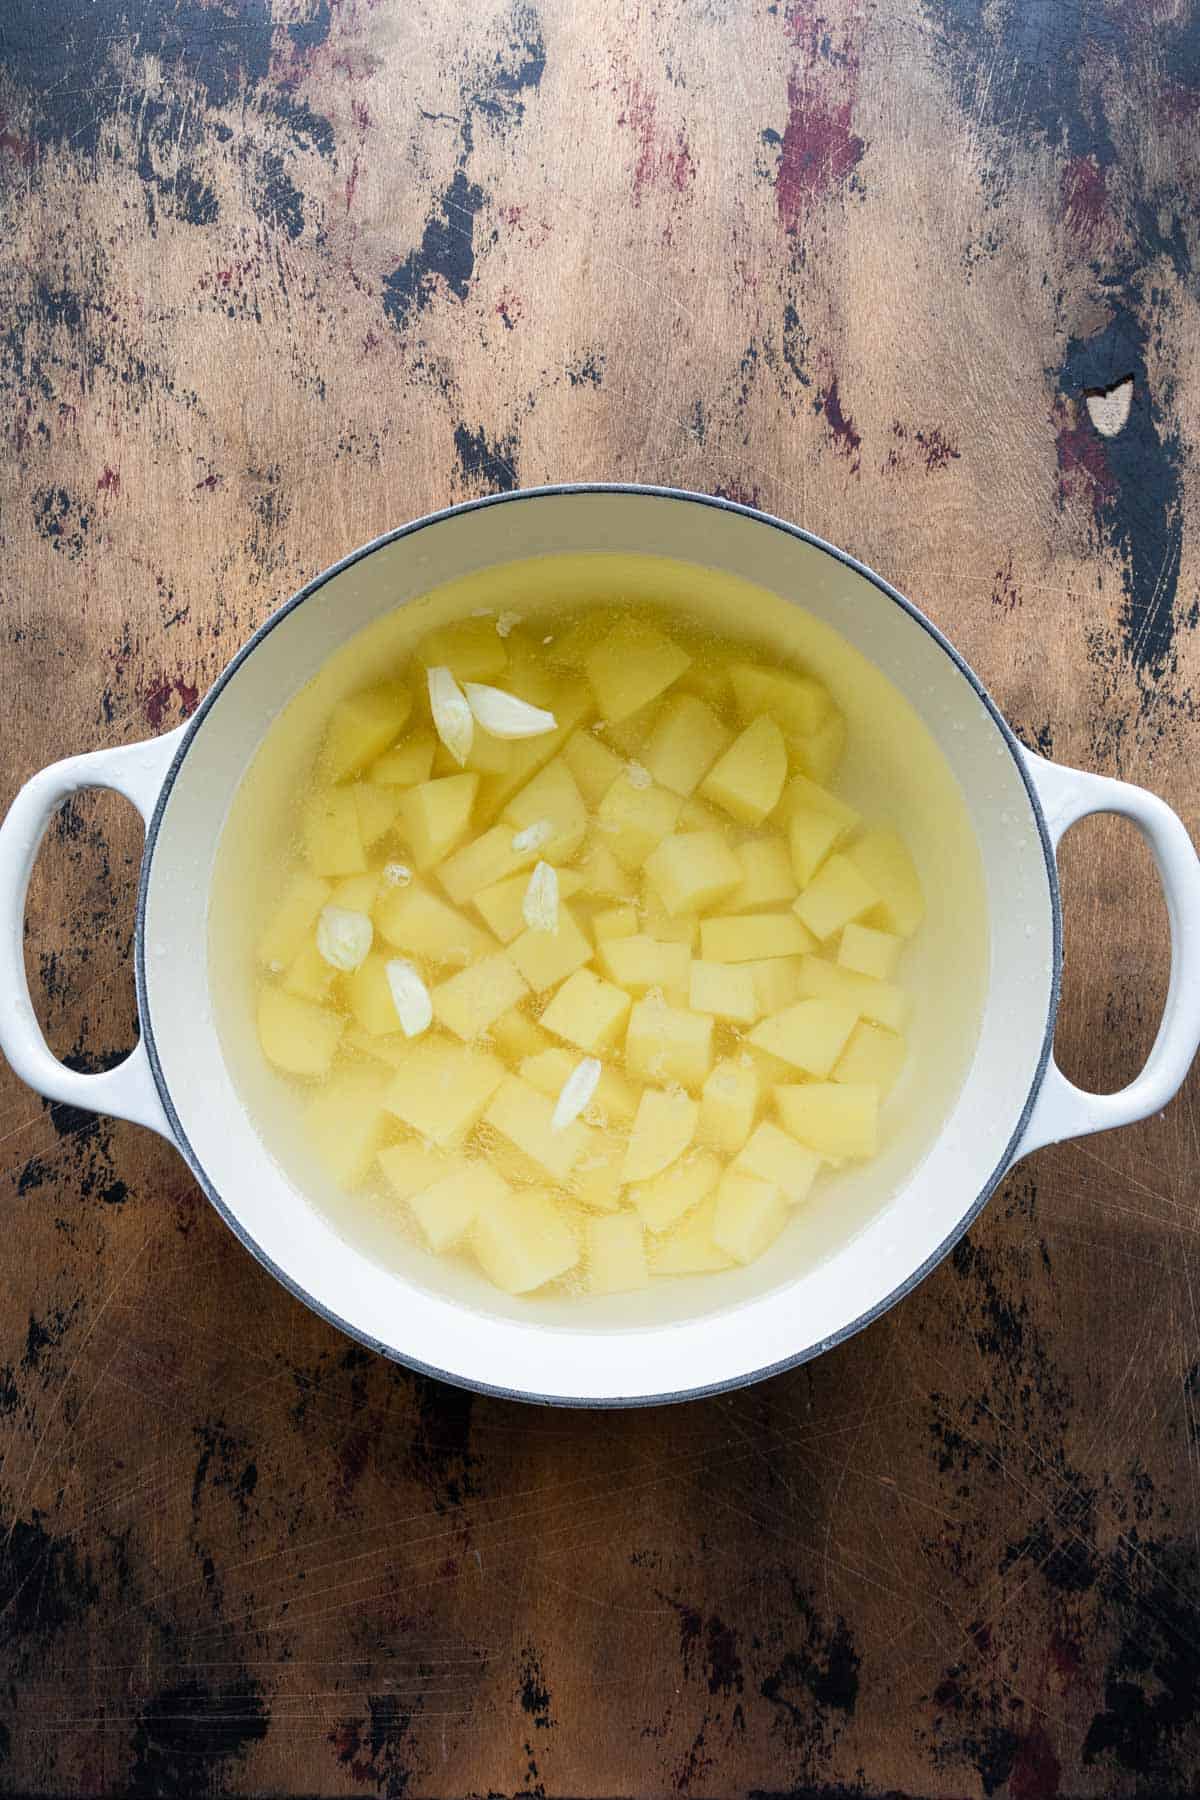 preparing the potatoes for boiling